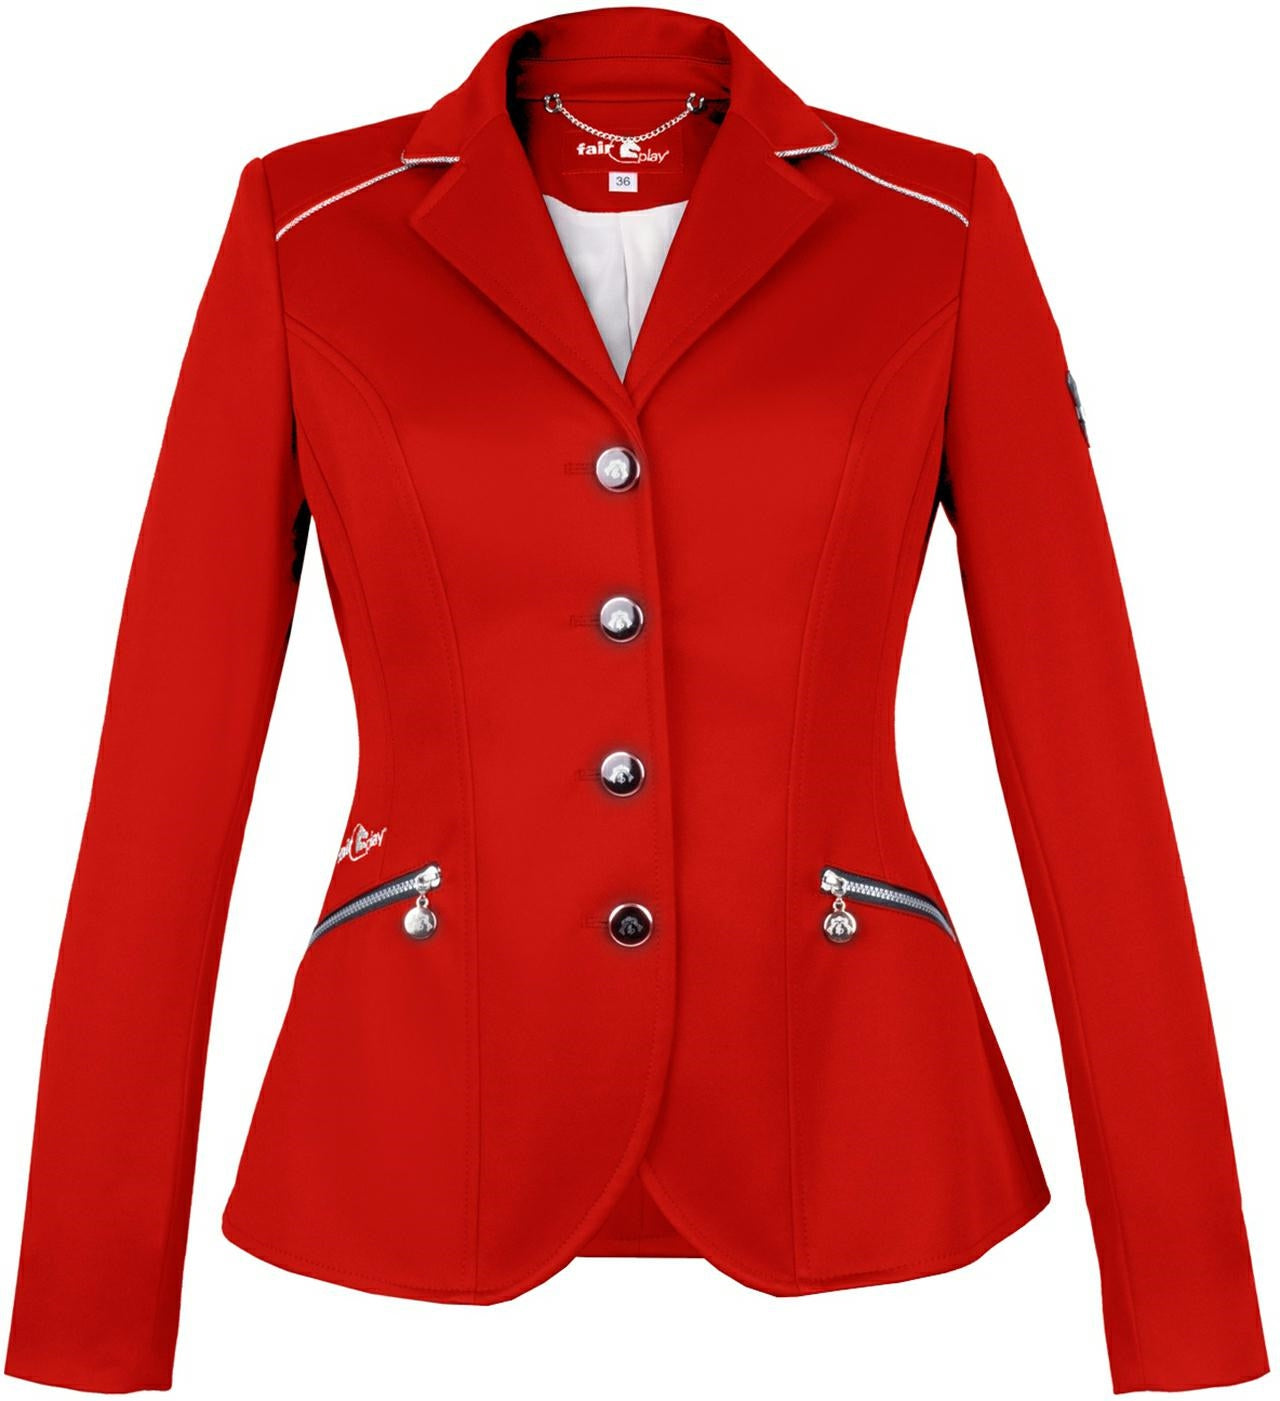 Red competition jacket